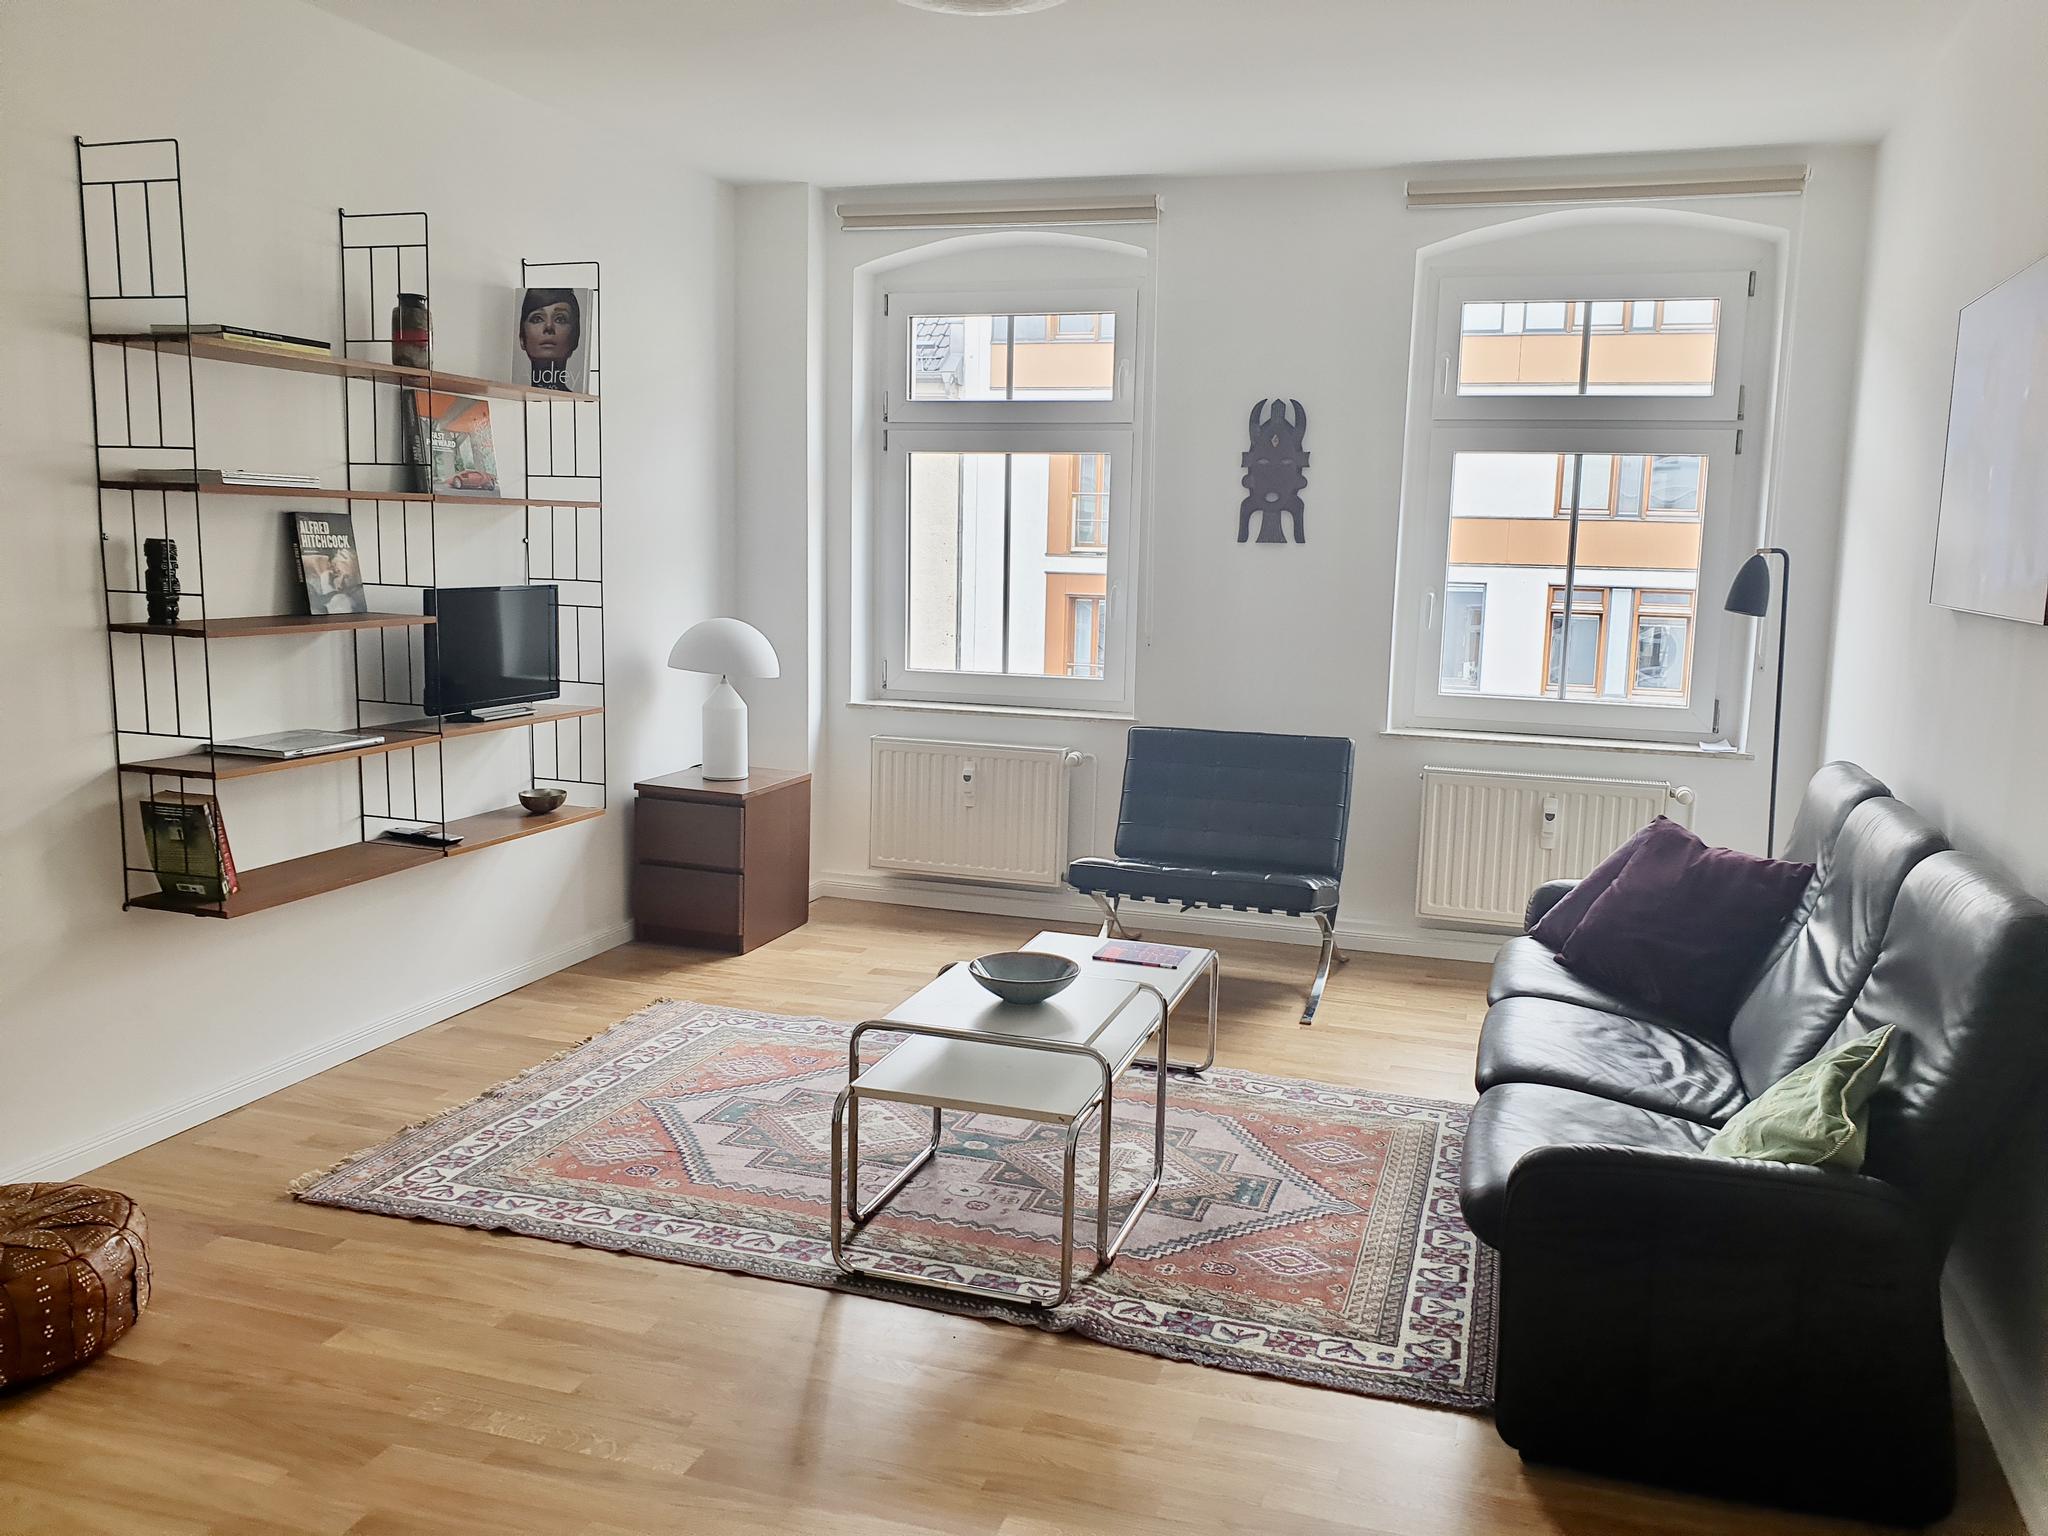 Zion - Entry ready apartment in Berlin